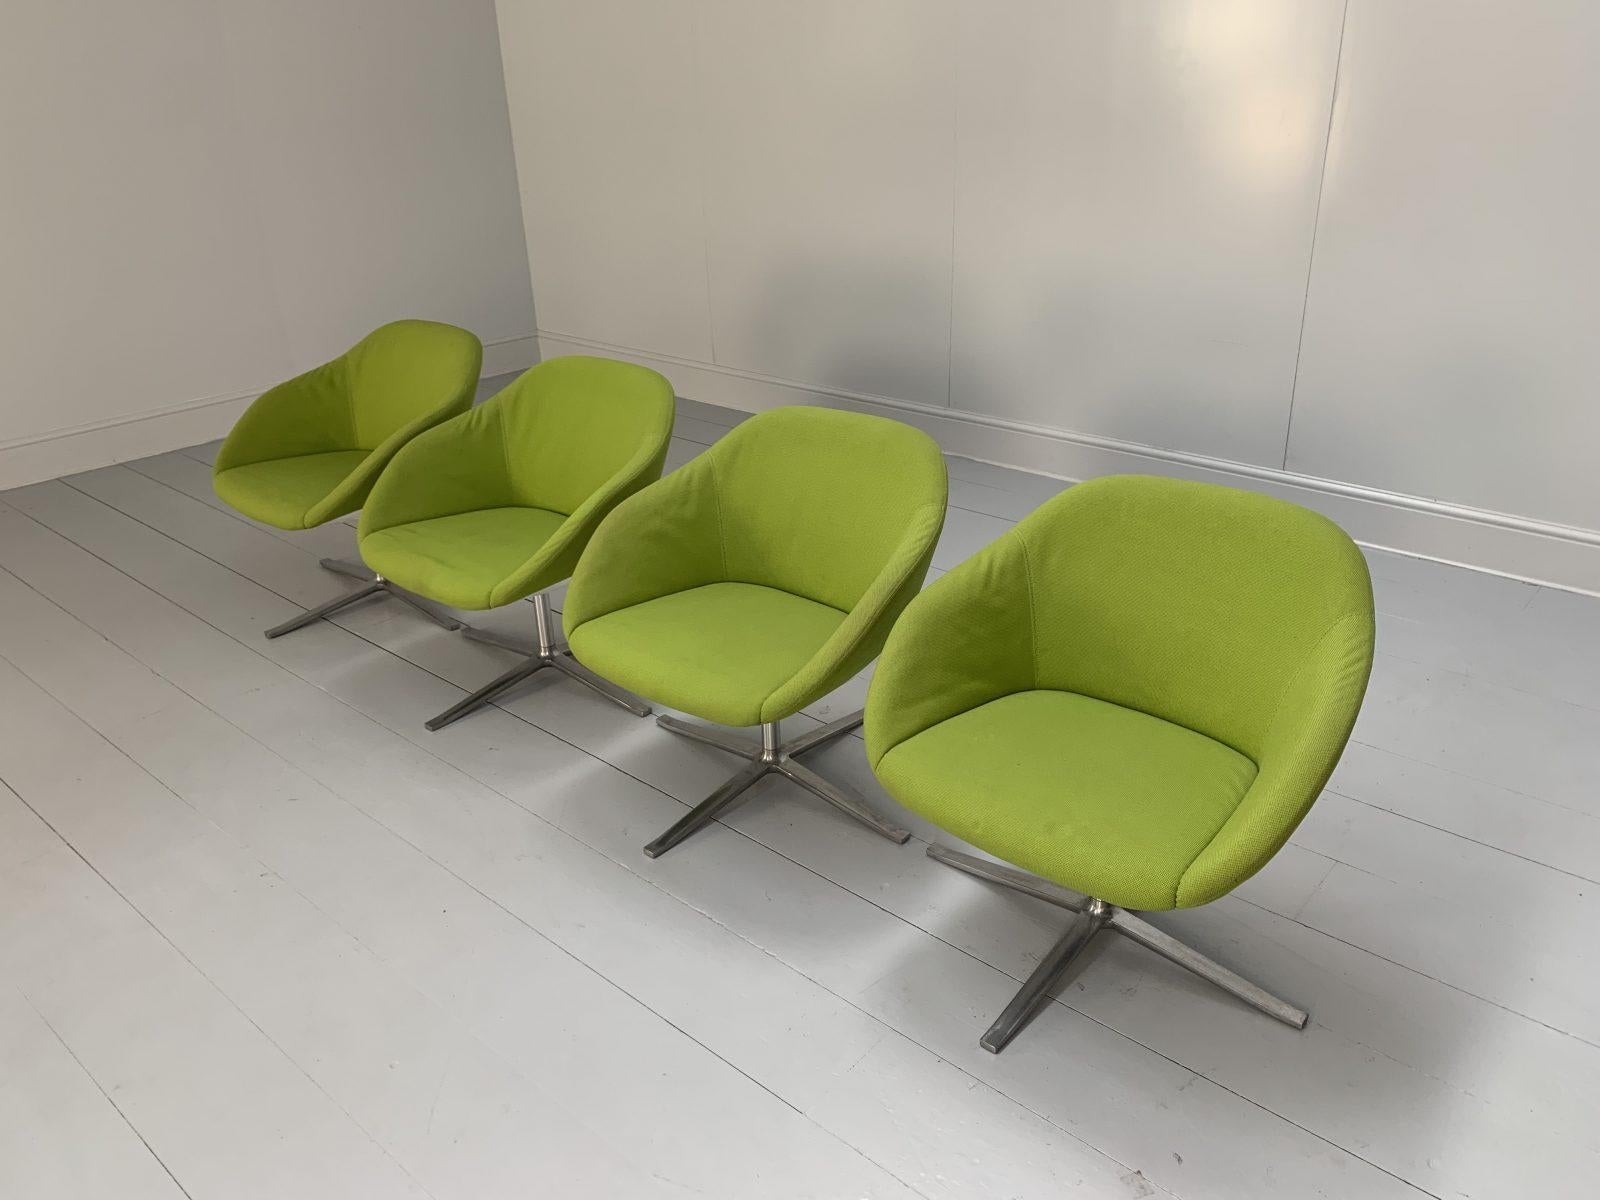 Suite of 4 Walter Knoll “Turtle” Armchairs – in Lime Green Fabric In Good Condition For Sale In Barrowford, GB